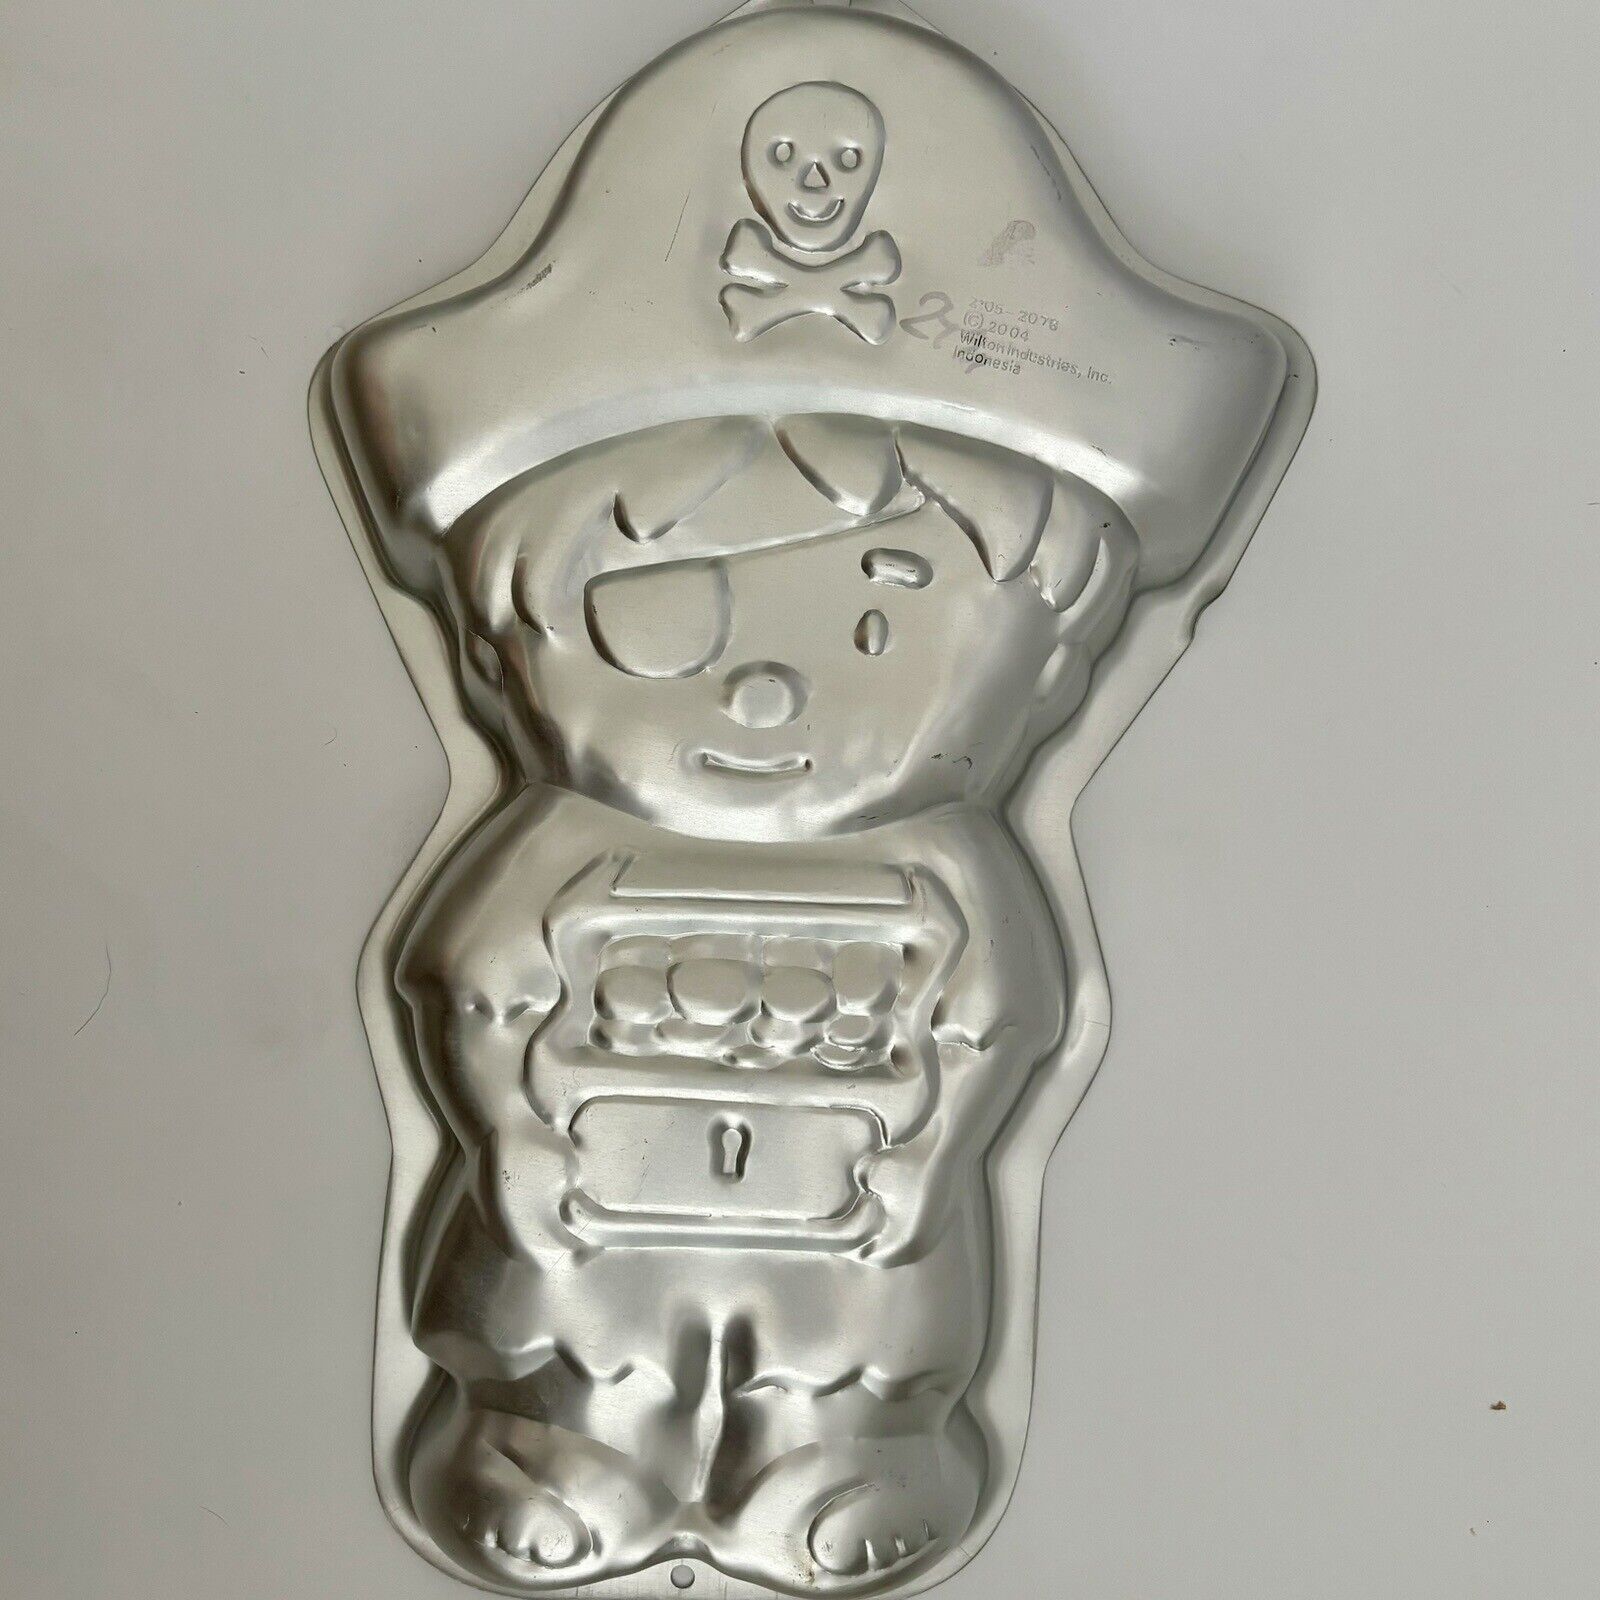 Wilton Cake Pan Lil Pirate Boy with Treasure Chest